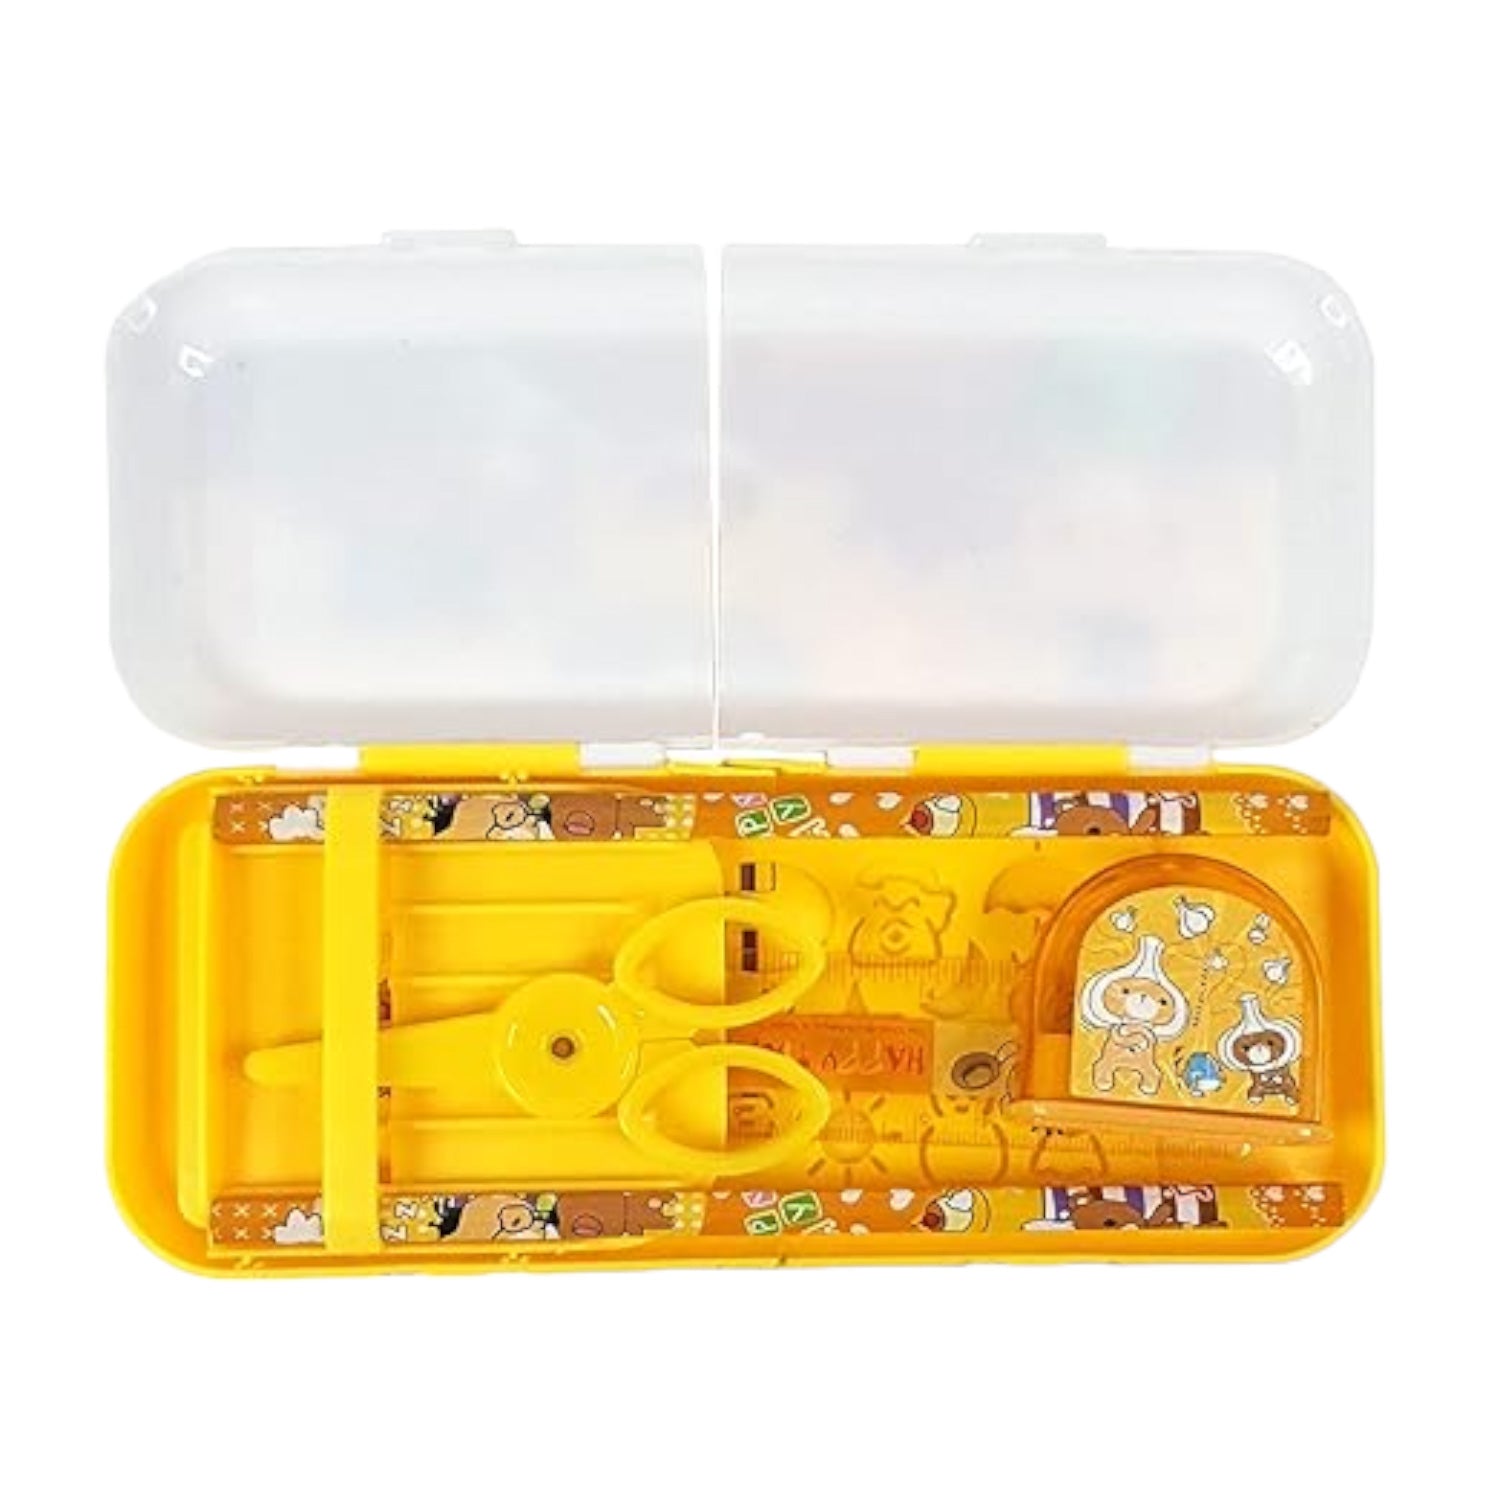 Stationery kit - Yellow Foldable Box with Stationary Items -for Kids, Children, Student, Office, Return Gifts - apkamart